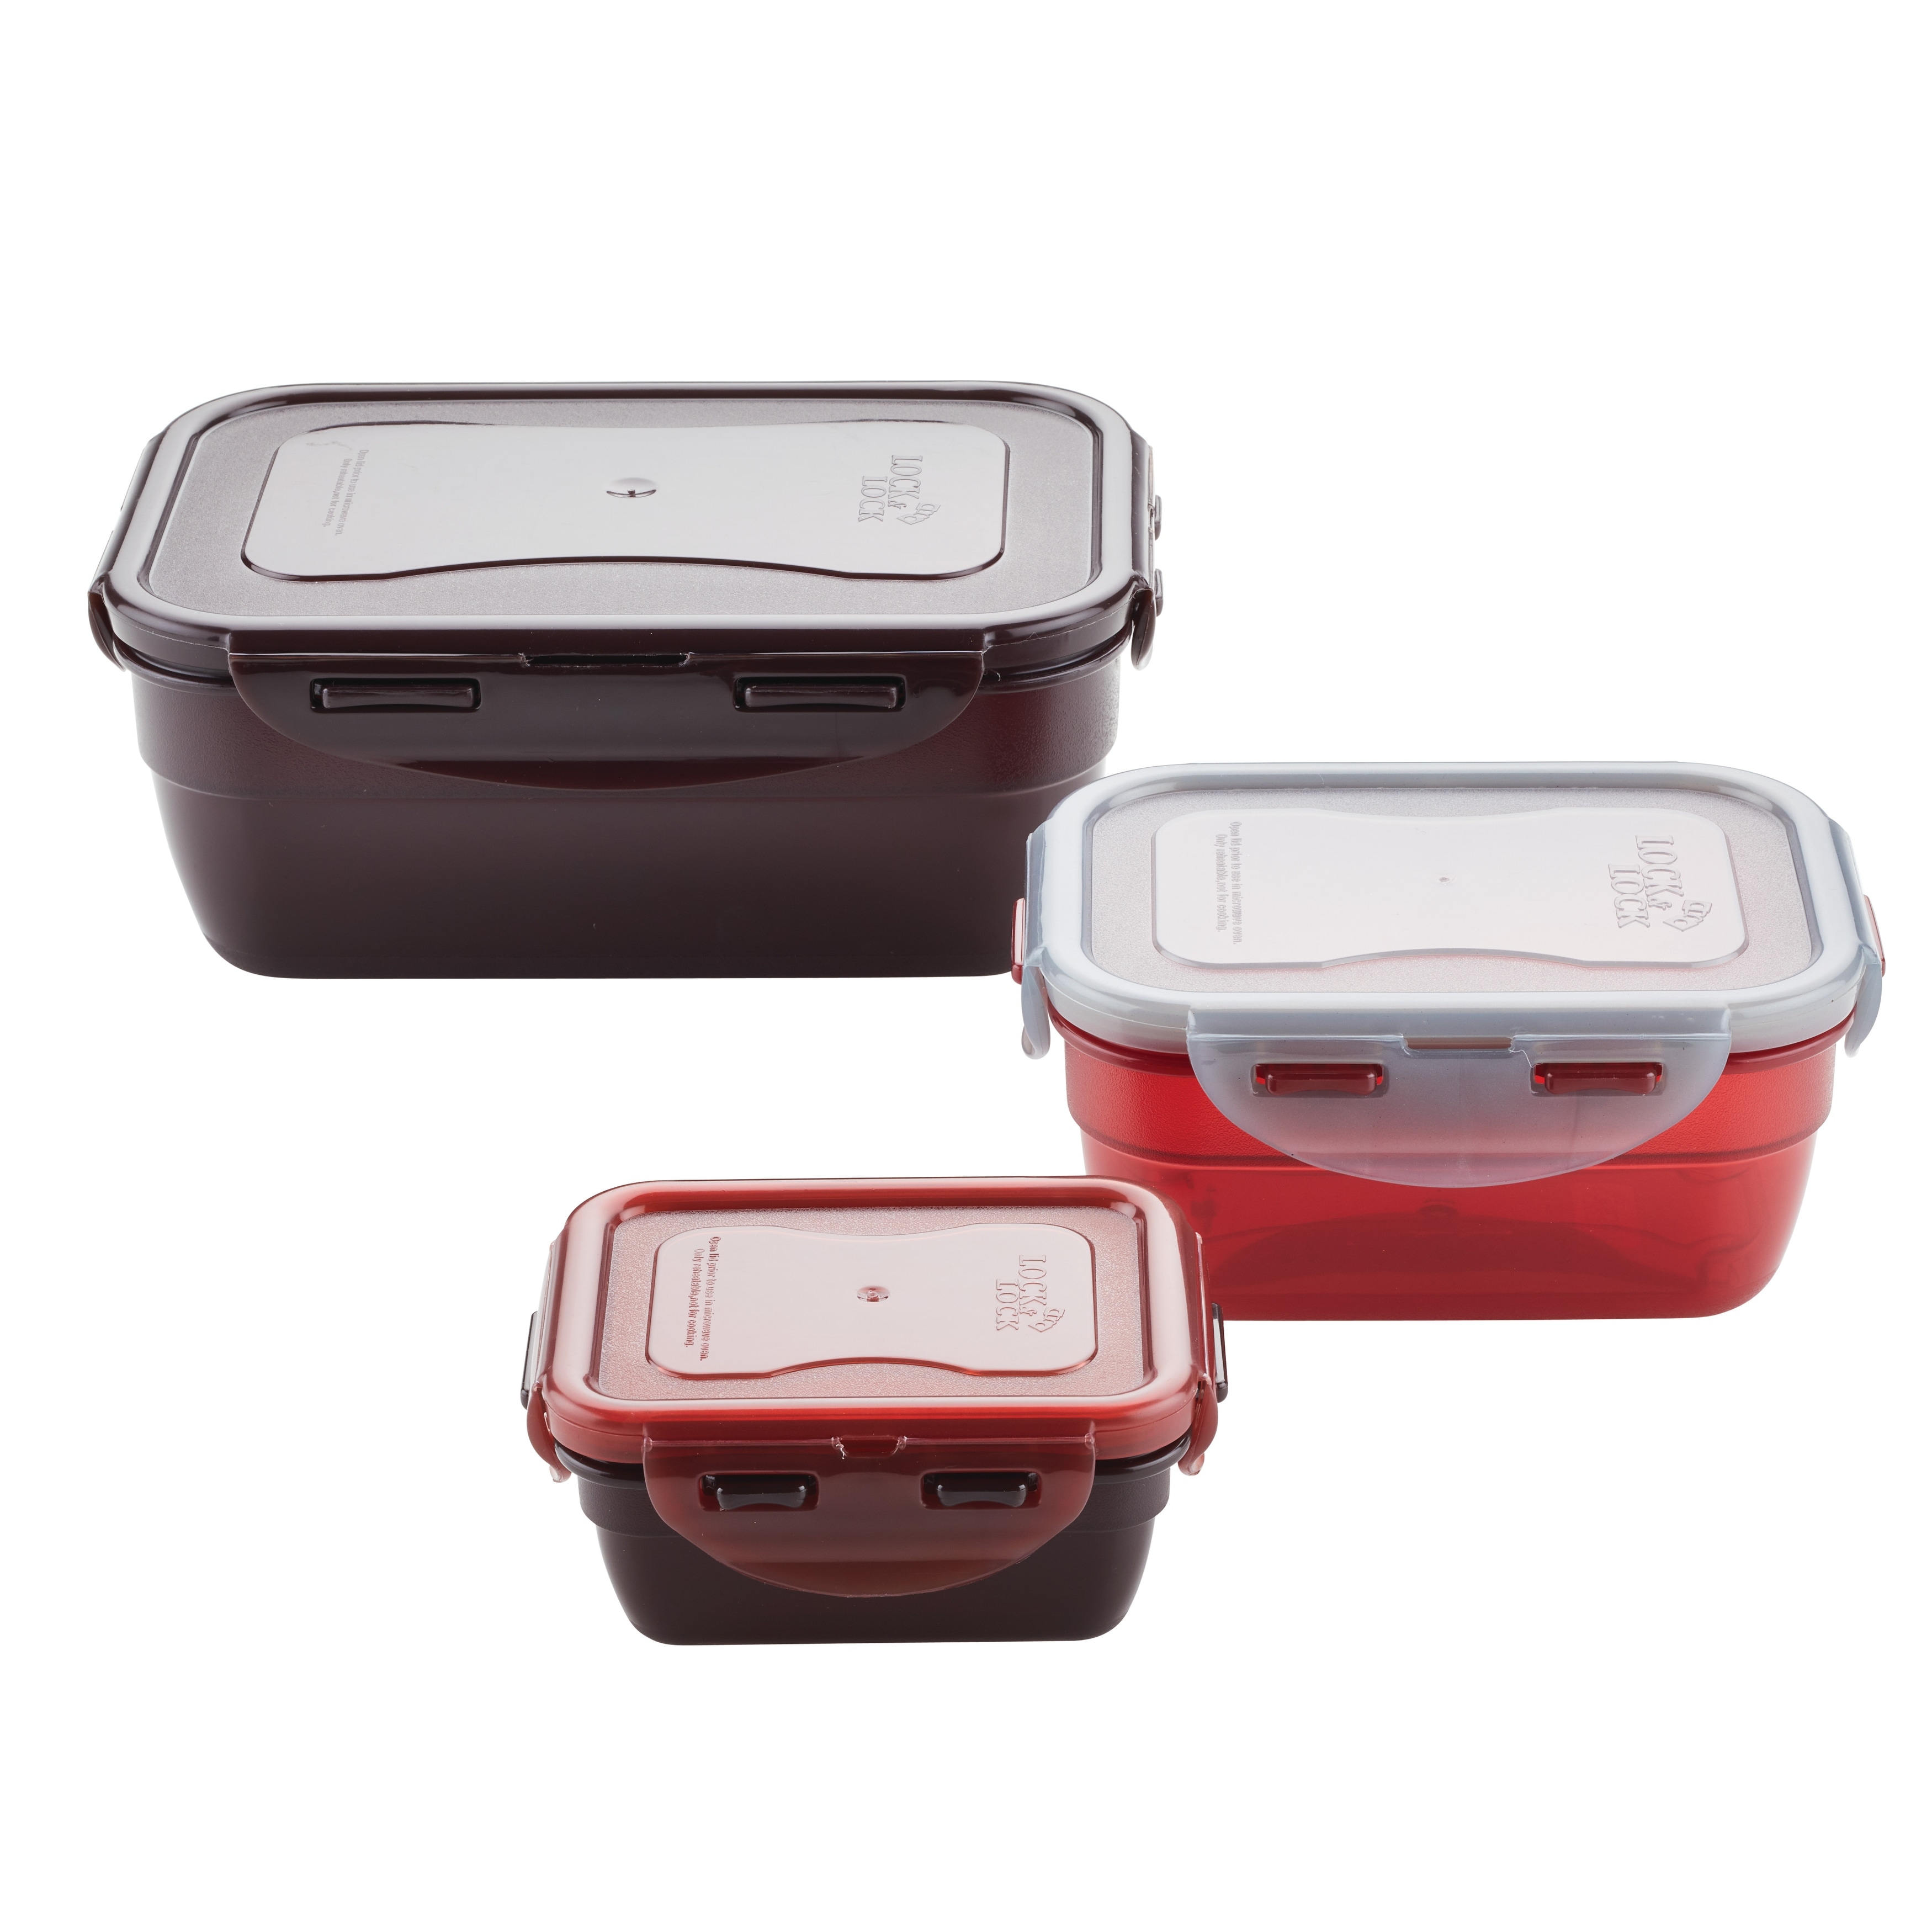 https://ak1.ostkcdn.com/images/products/is/images/direct/28cade9e76070759dcb49b59597bddac9ee2f401/ECO-by-LocknLock-Food-Storage-Container-Set%2C-6-Piece%2C-Assorted-Colors.jpg